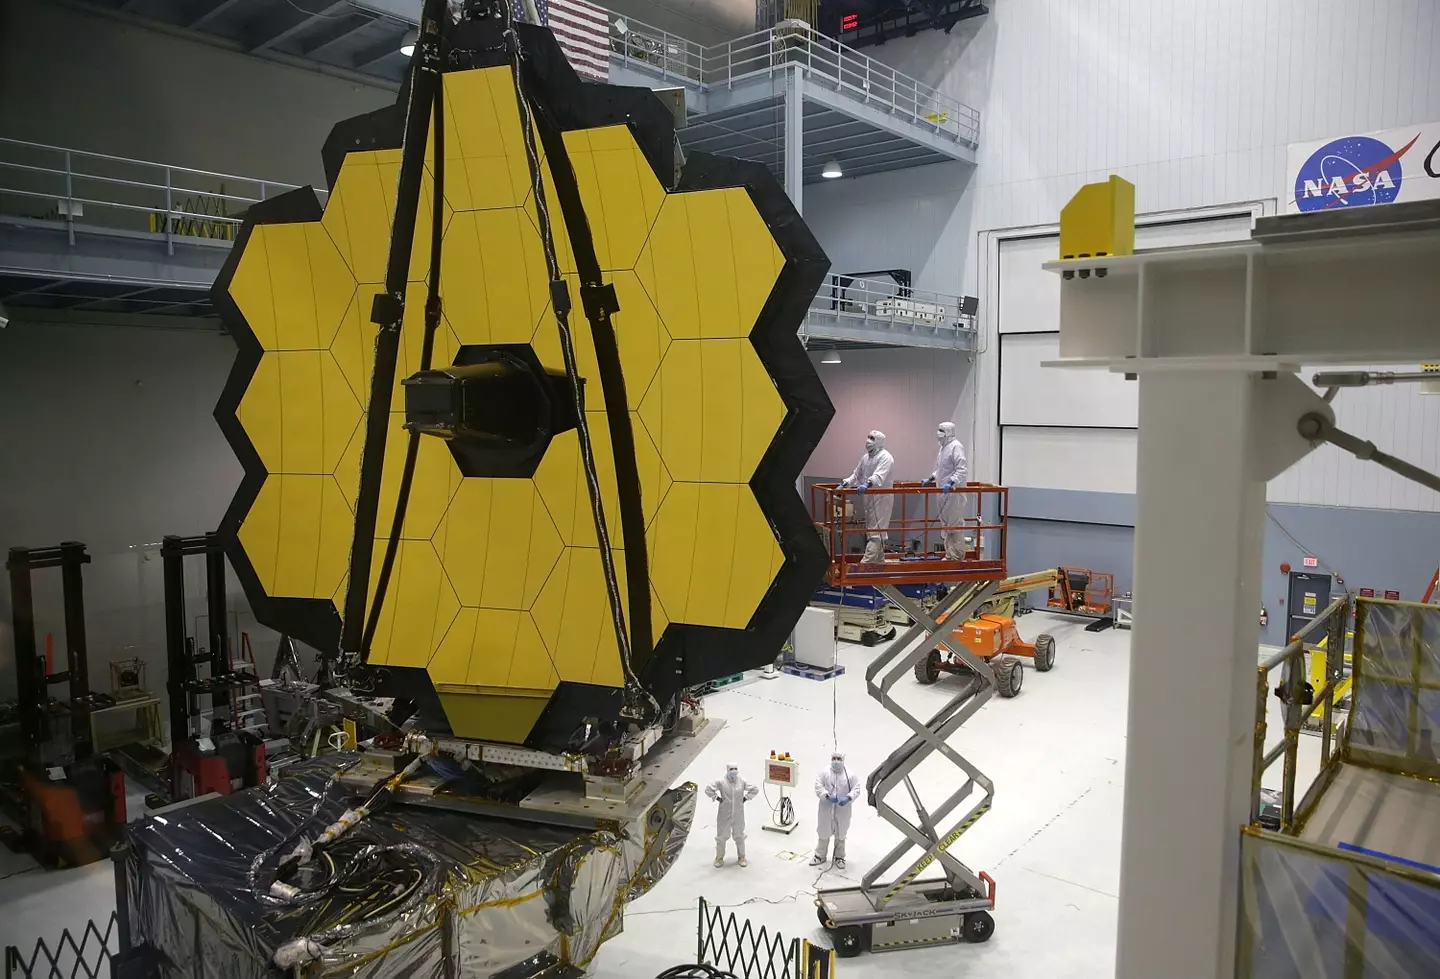 The James Webb Space Telescope while under construction in 2016, in 2021 it was launched into space.